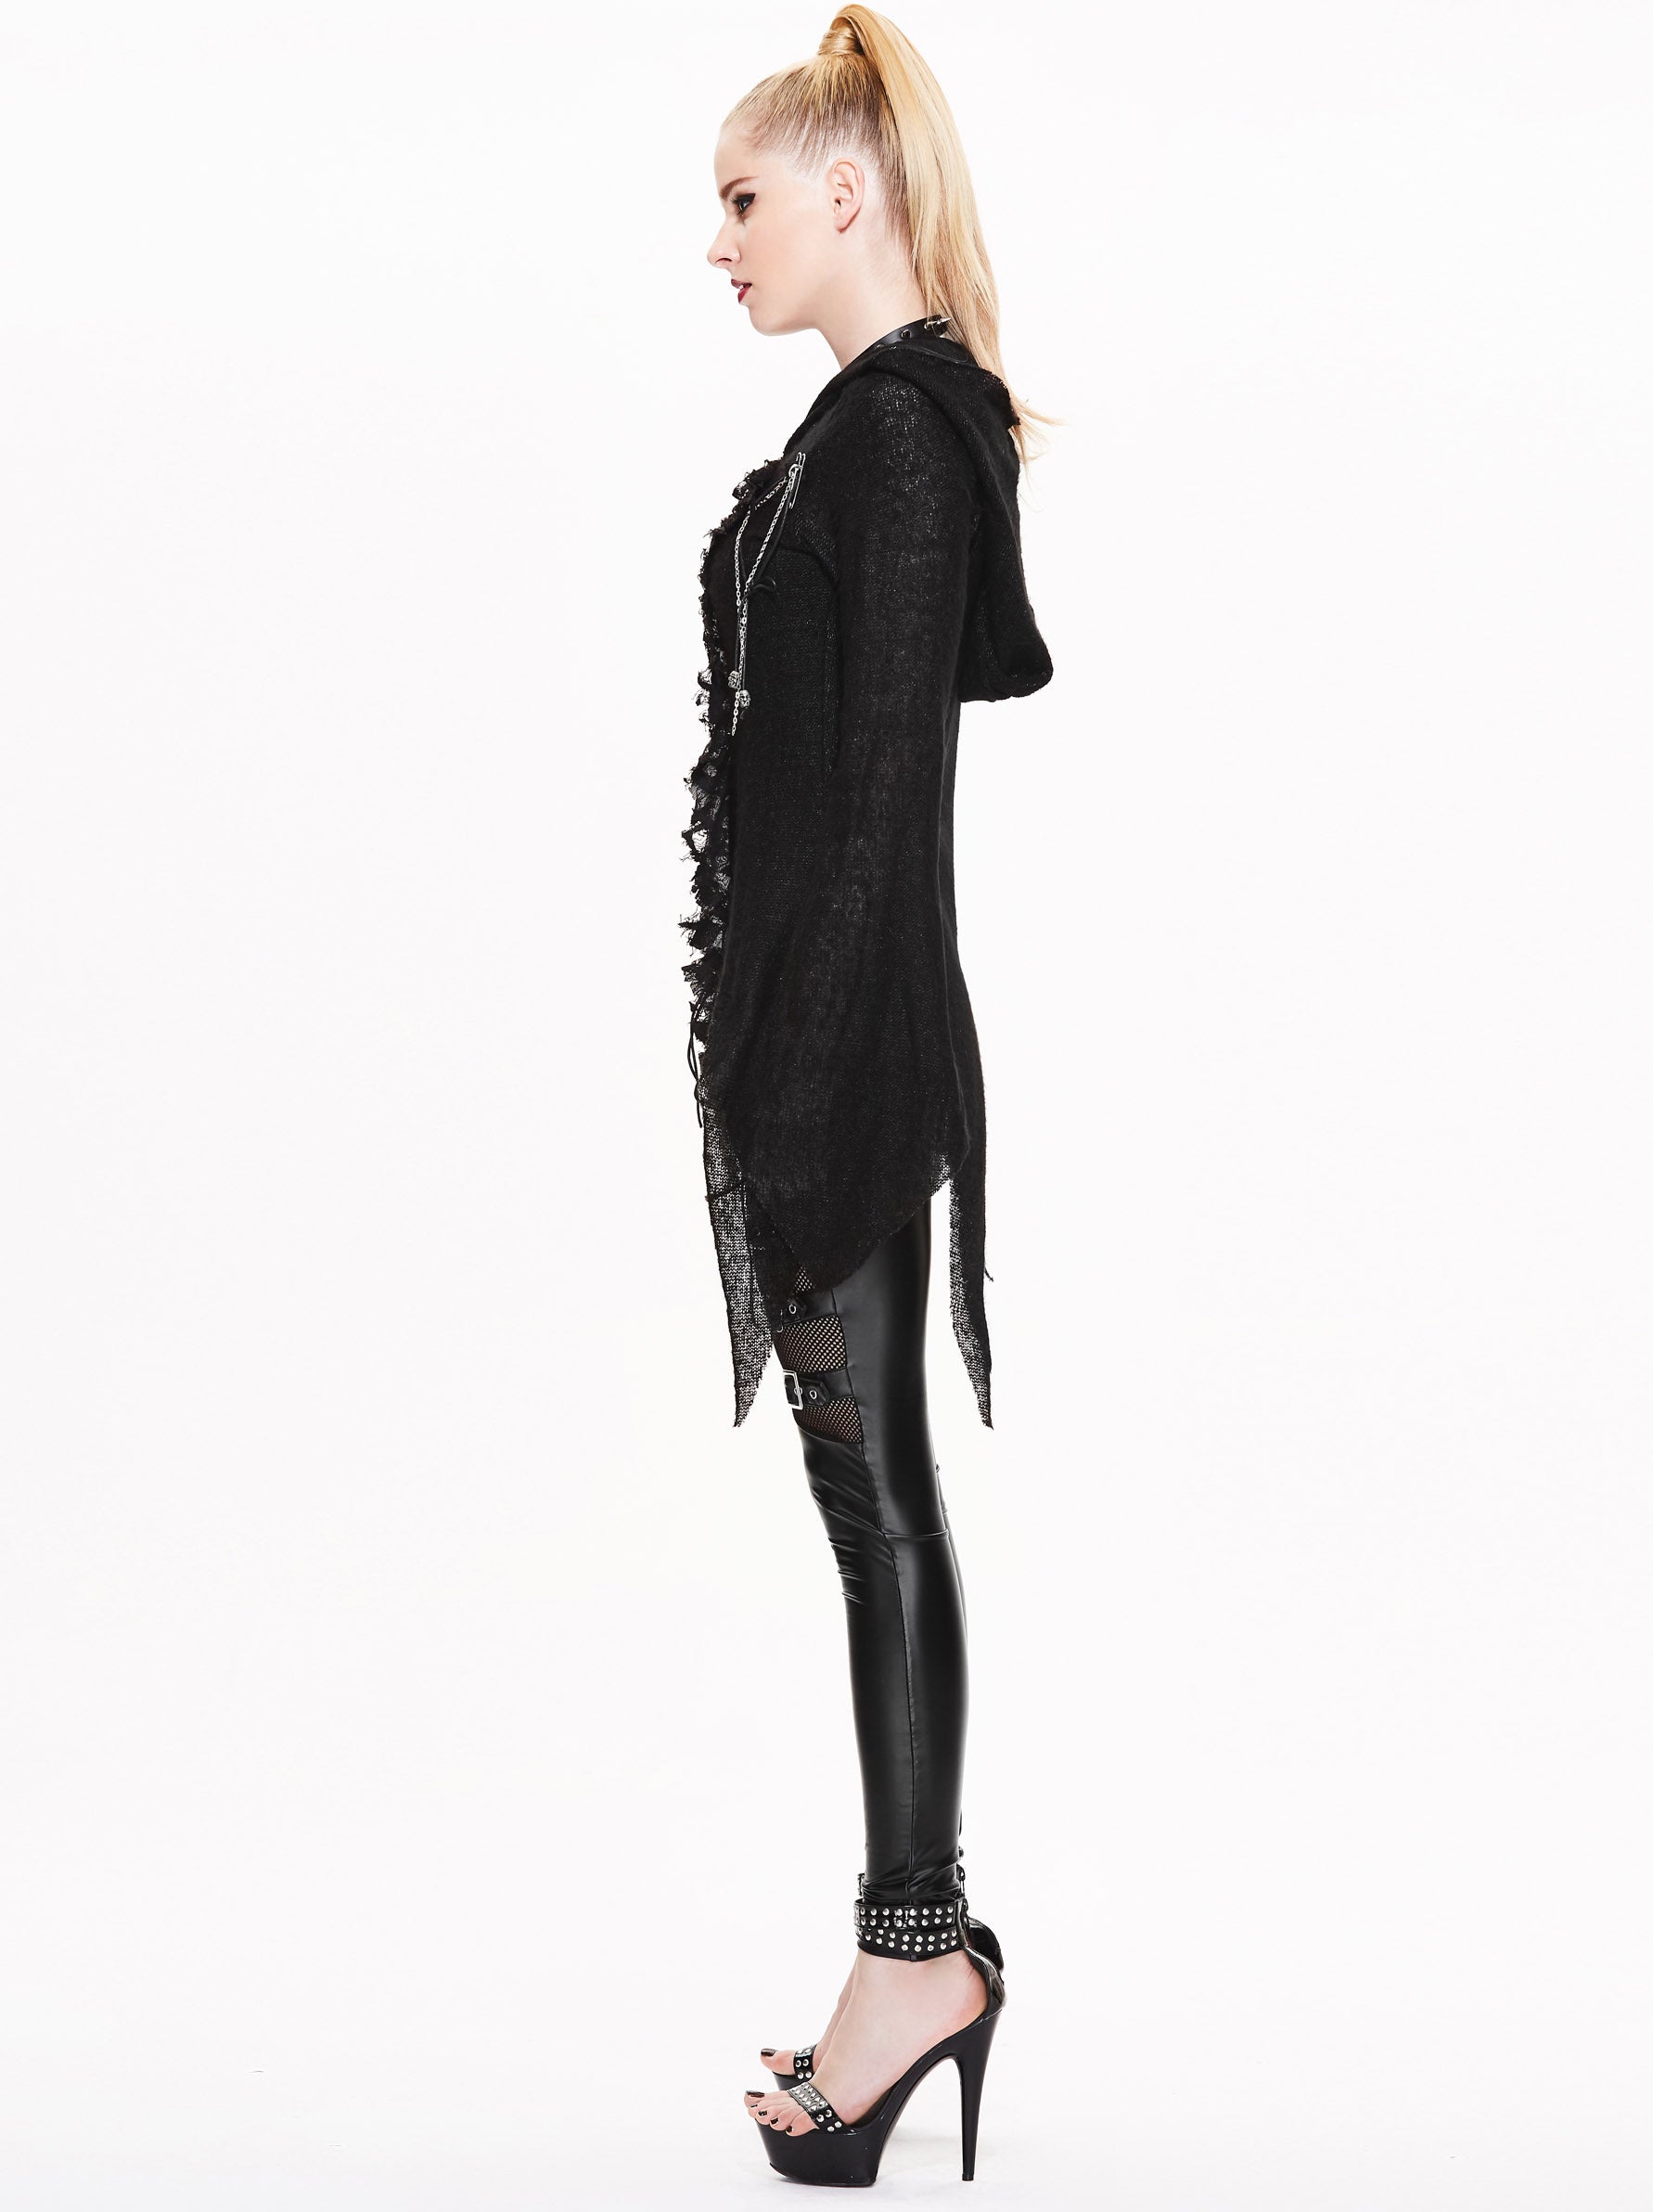 Witches hood knitted zip up cardigan - SR003